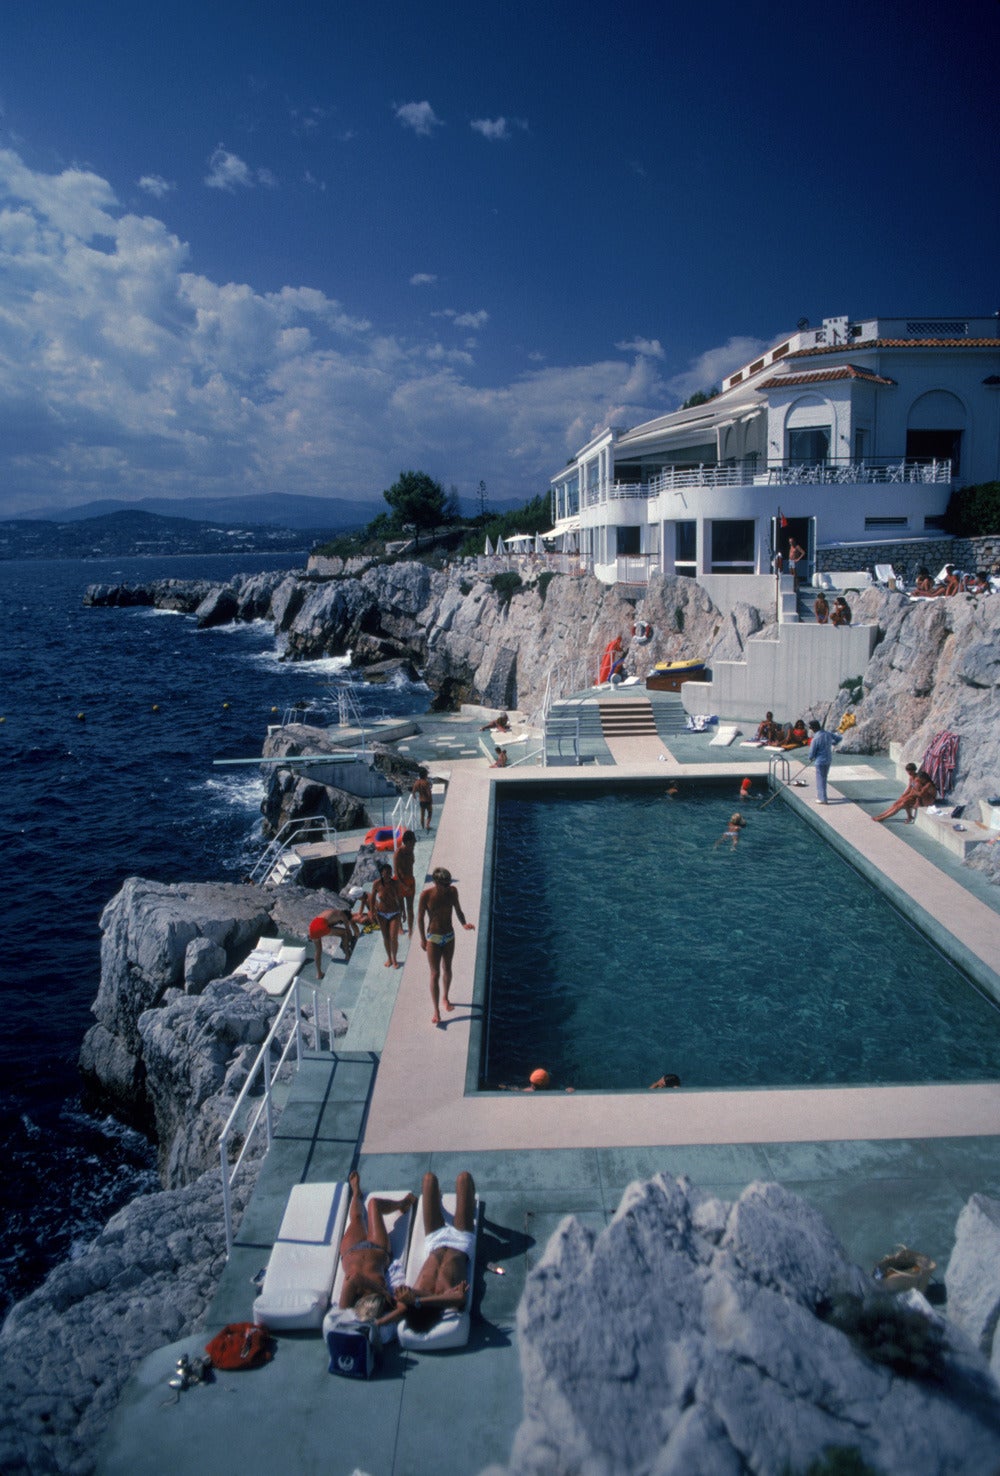 Slim Aarons Color Photograph - Guests by the pool at the Hotel du Cap Eden-Roc, Antibes, France